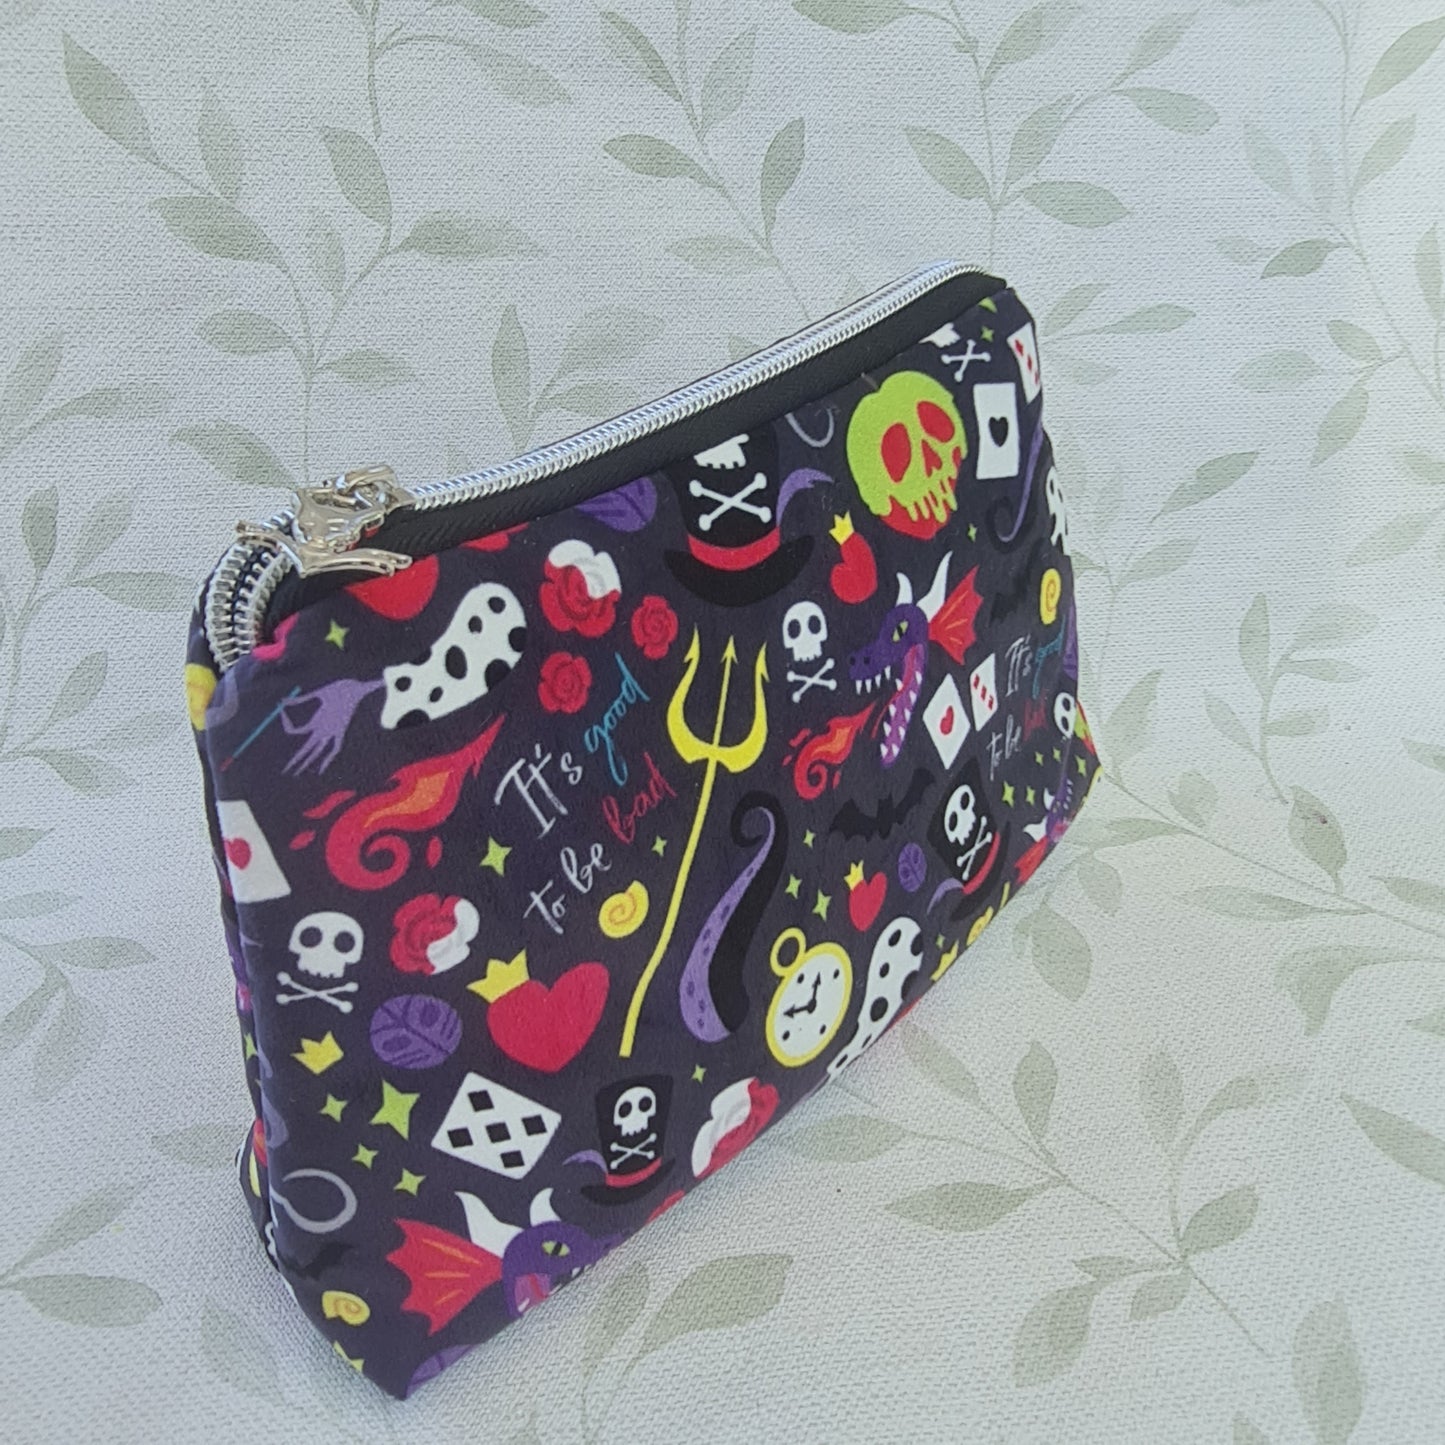 Velvet Mixed Villains lined triangle cosmetic bag with zipper